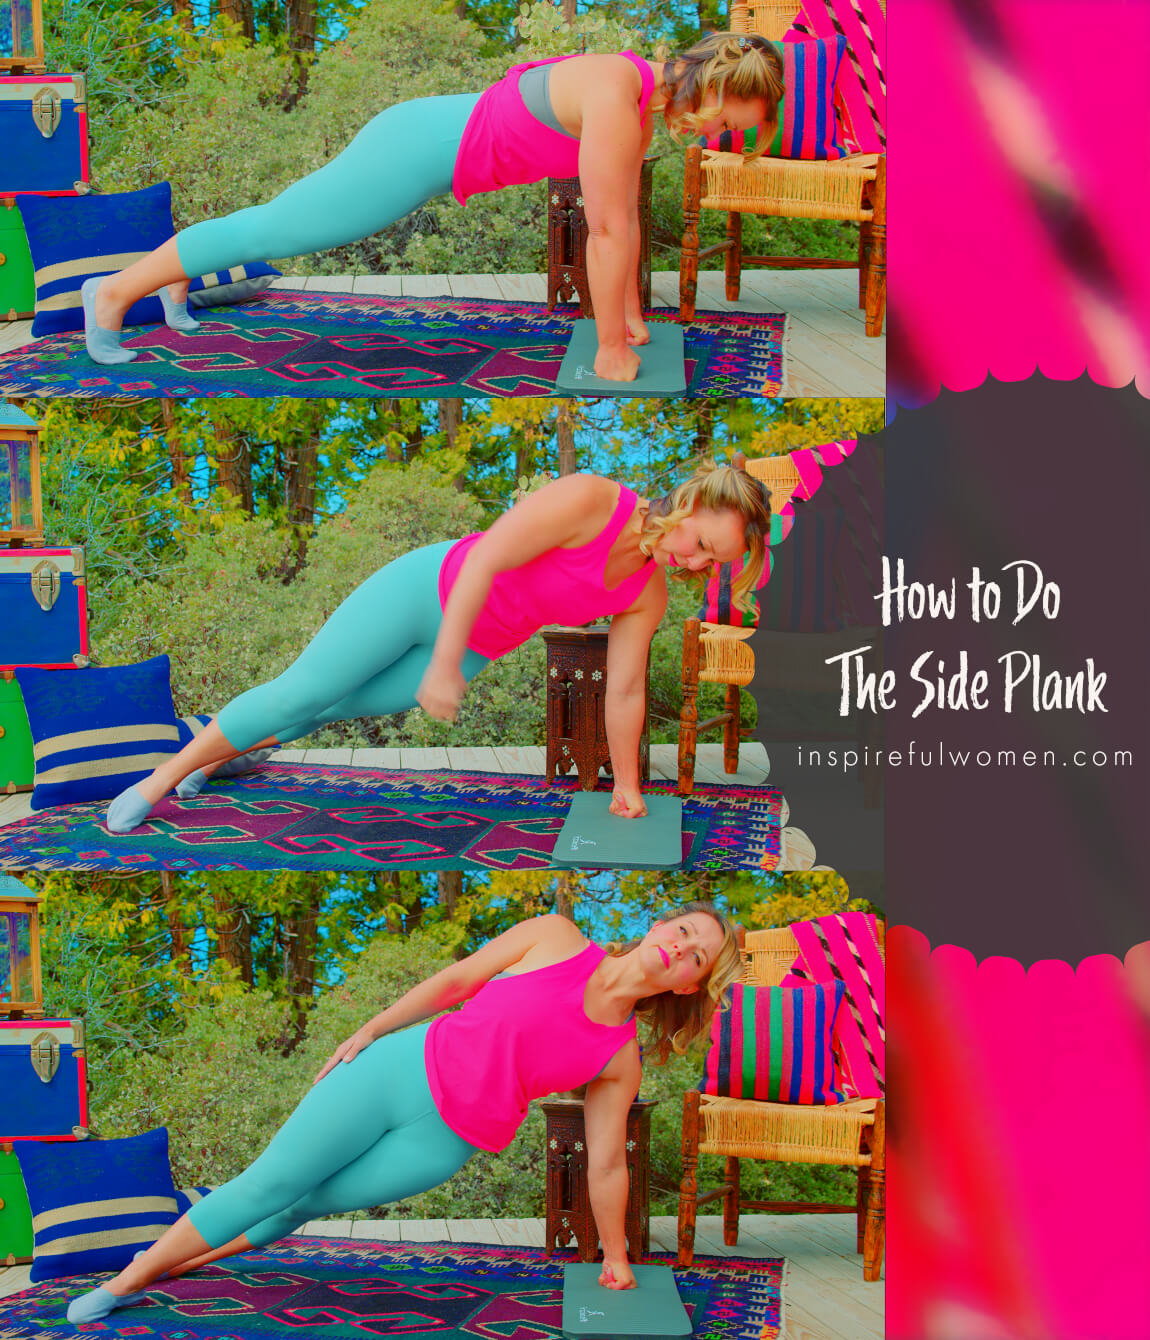 how-to-side-planks-straight-leg-obliques-core-workout-at-home-proper-form